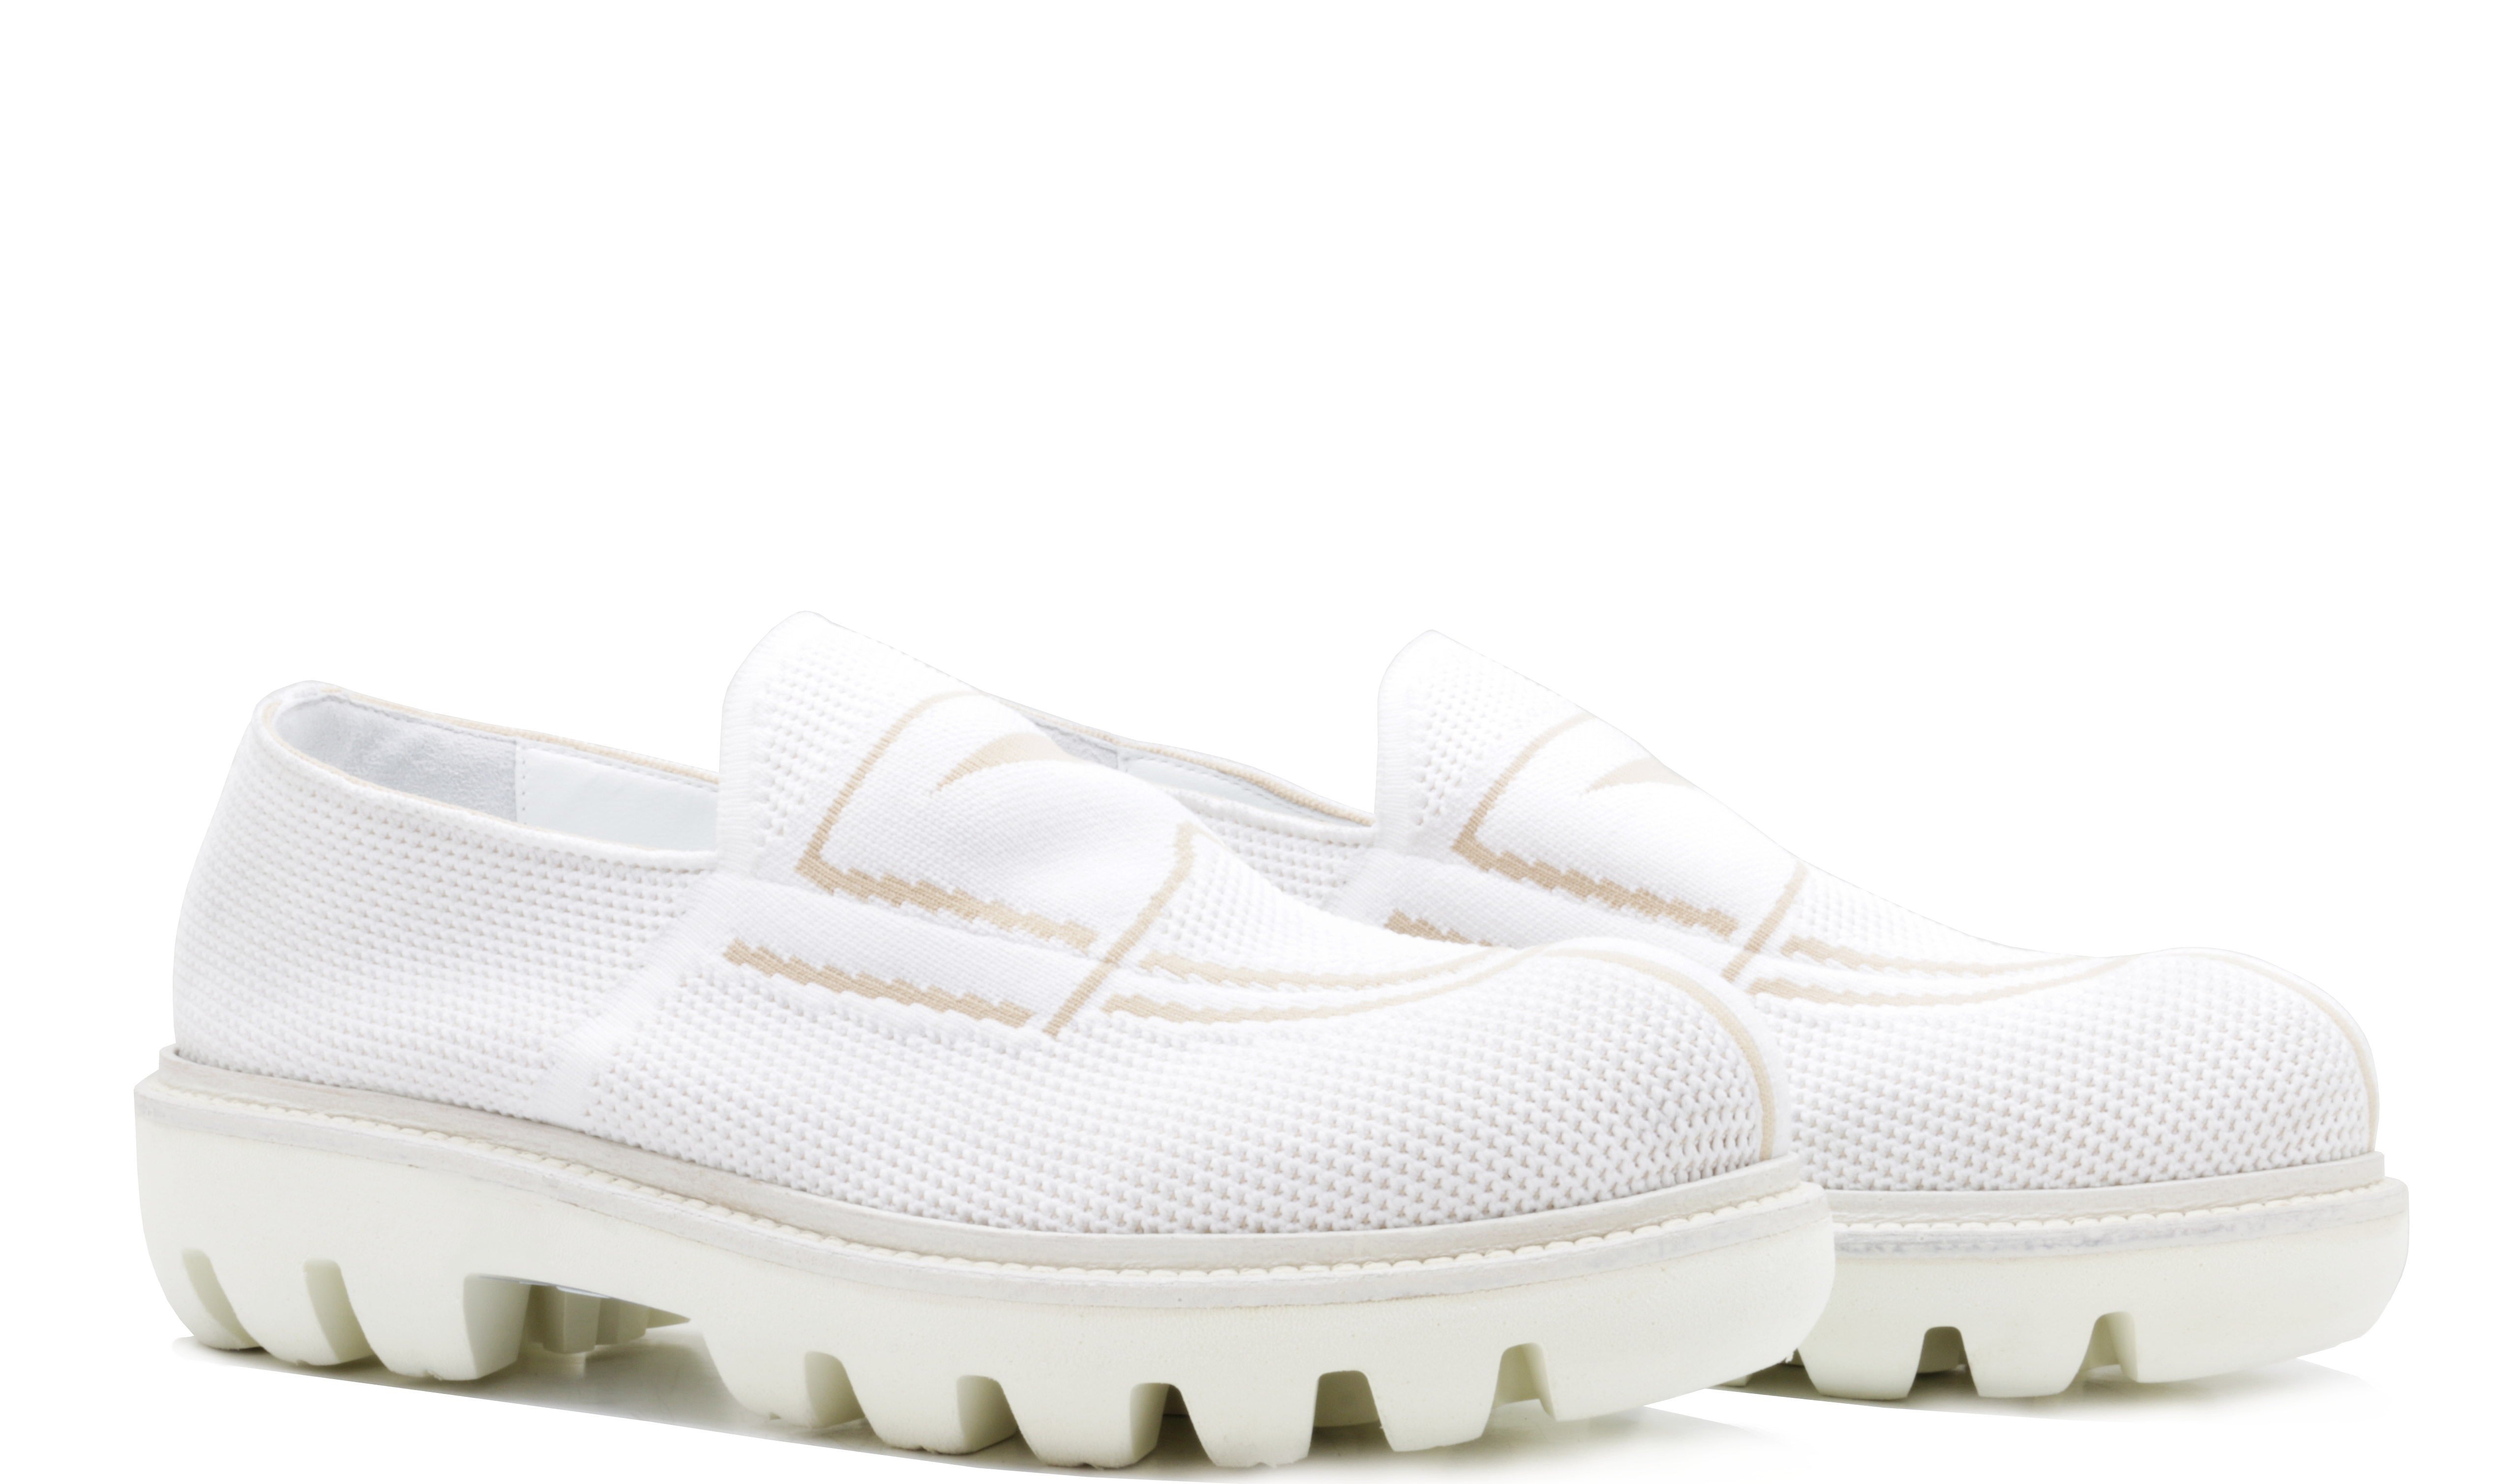 Moccasin in white canvas